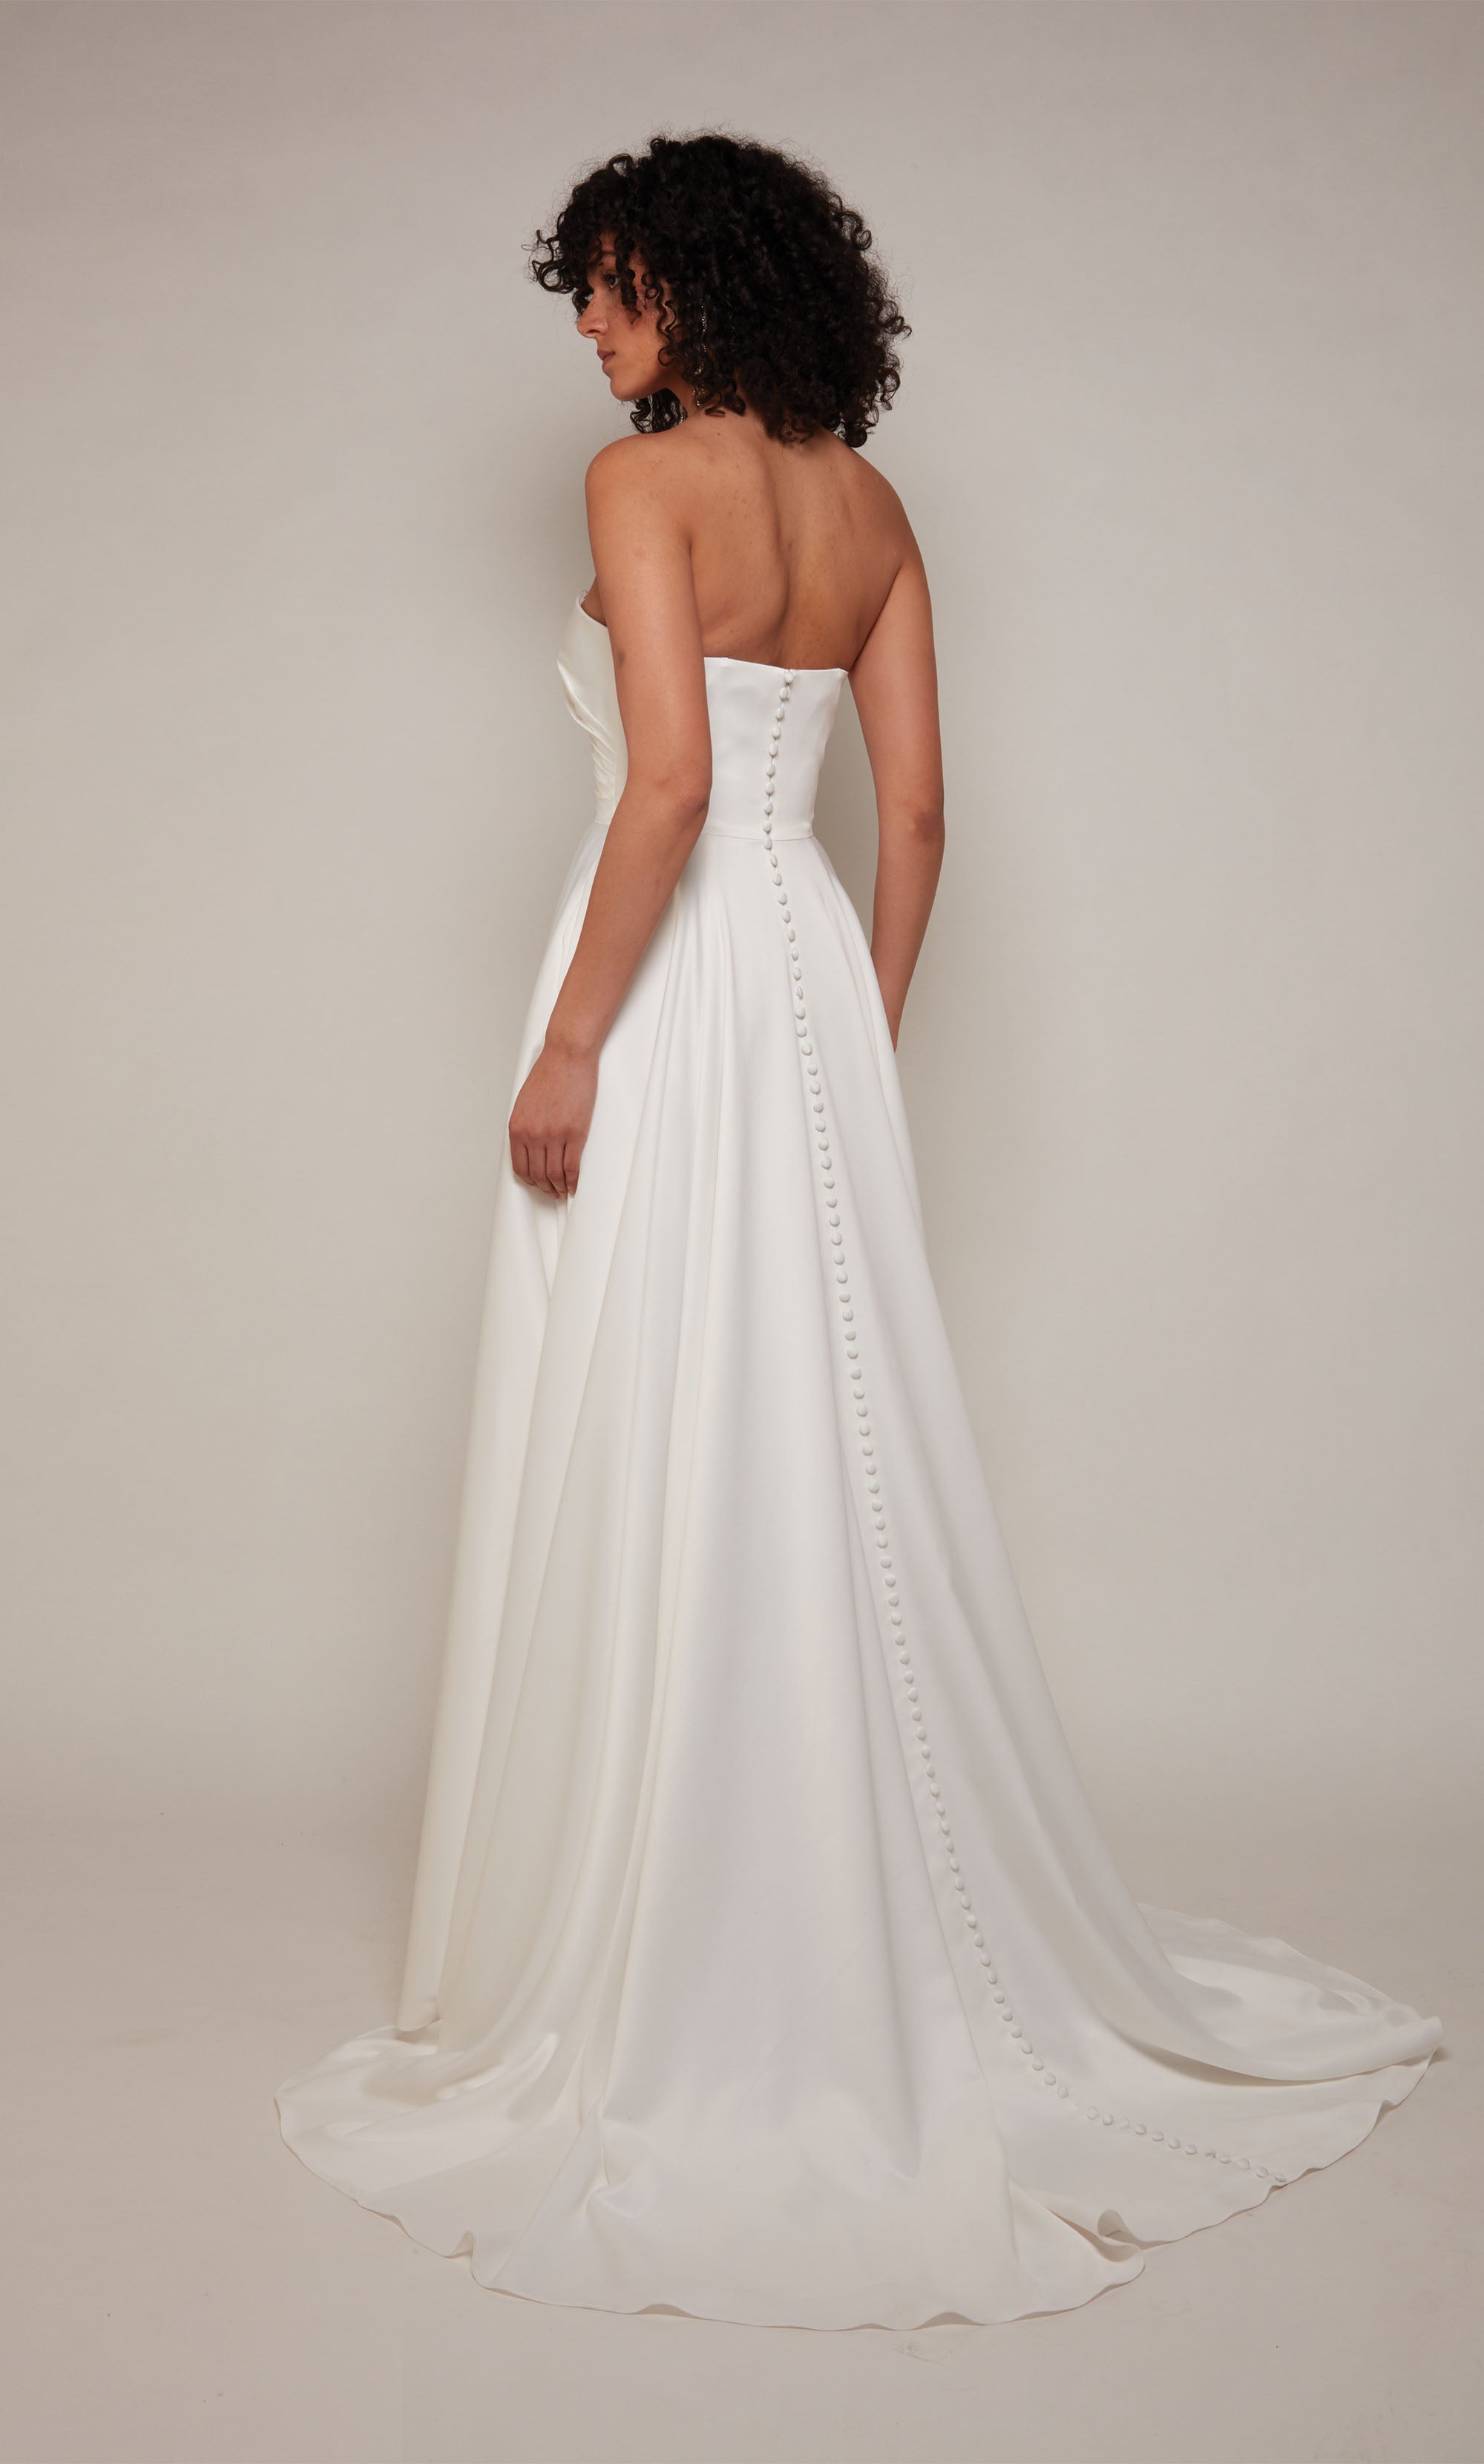 A-line satin bridal gown featuring a strapless, semi-sweetheart neckline, a pleated bodice, and high side slit in the color diamond white.